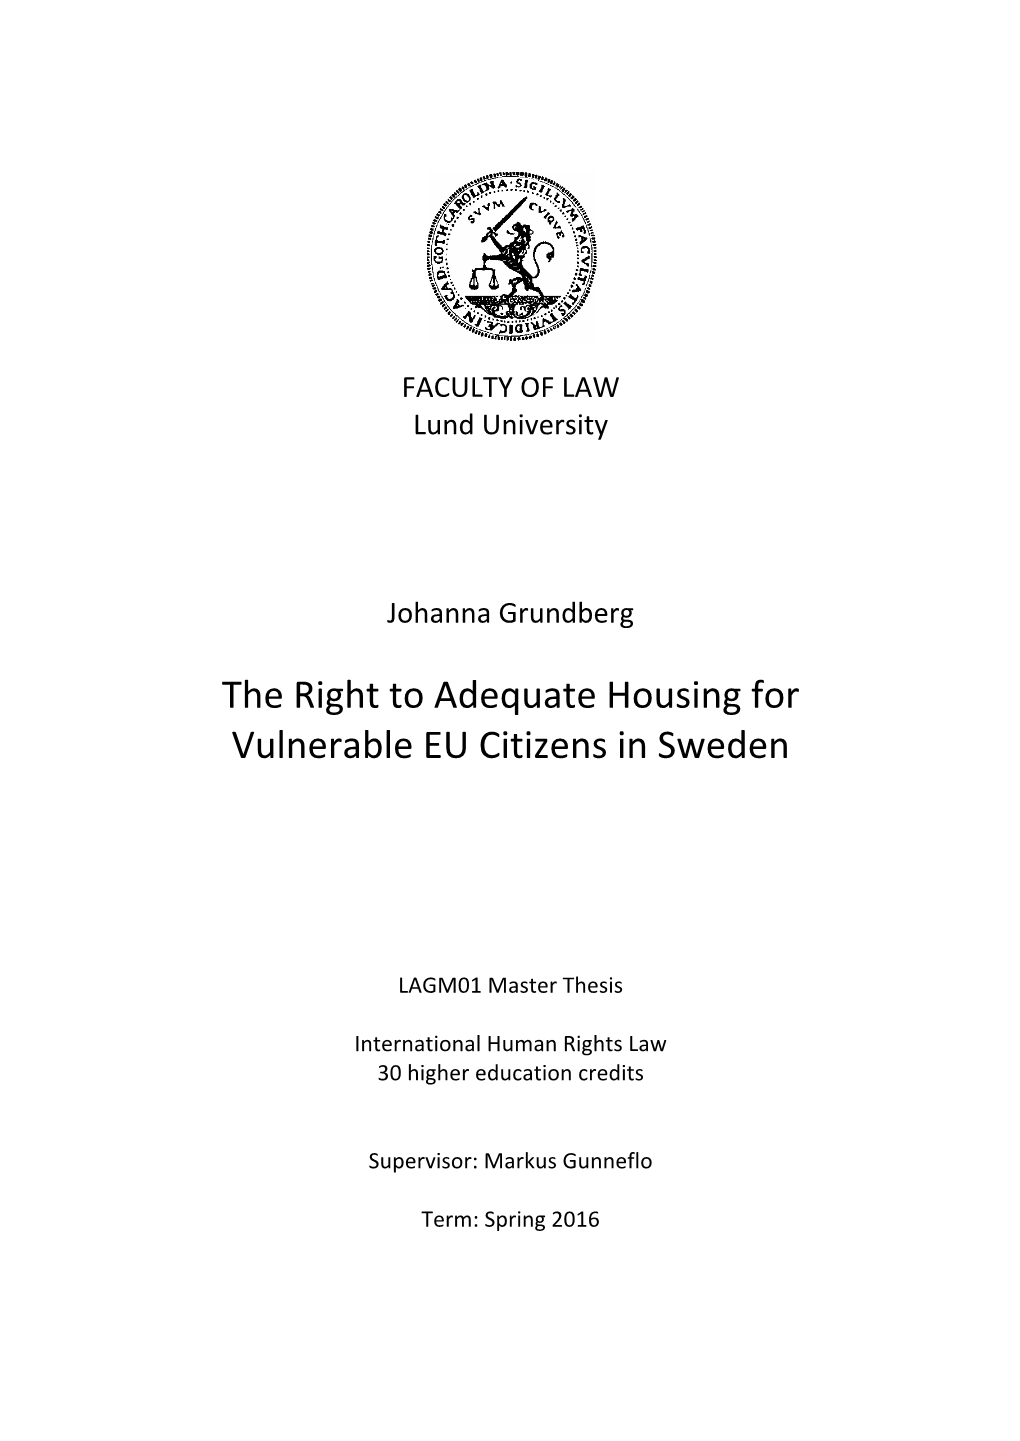 The Right to Adequate Housing for Vulnerable EU Citizens in Sweden